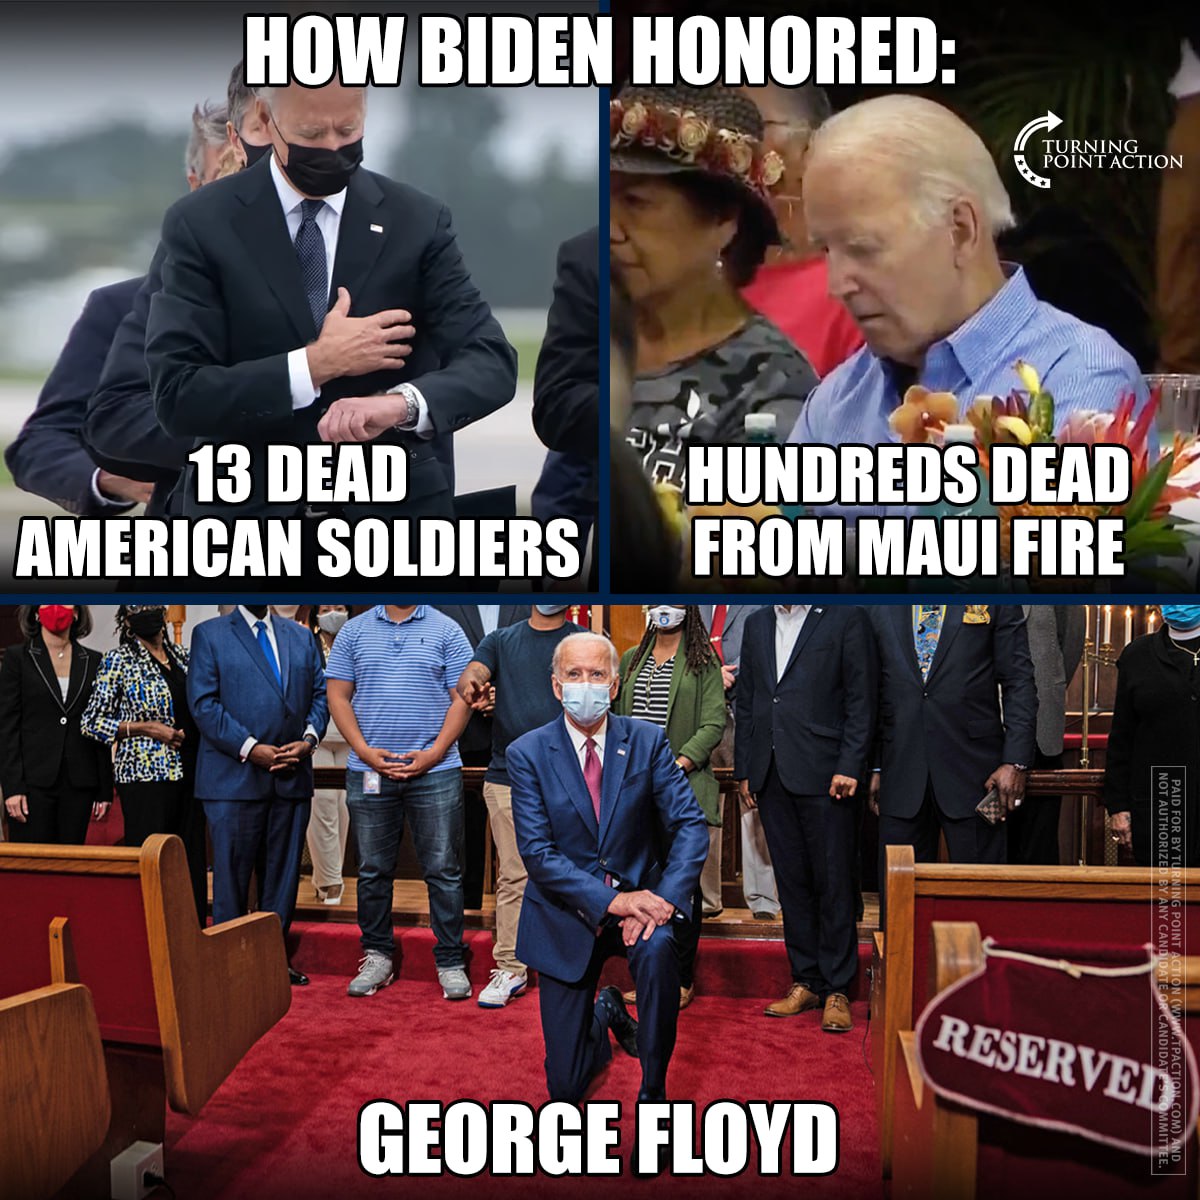 There is nothing honorable about Joe Biden